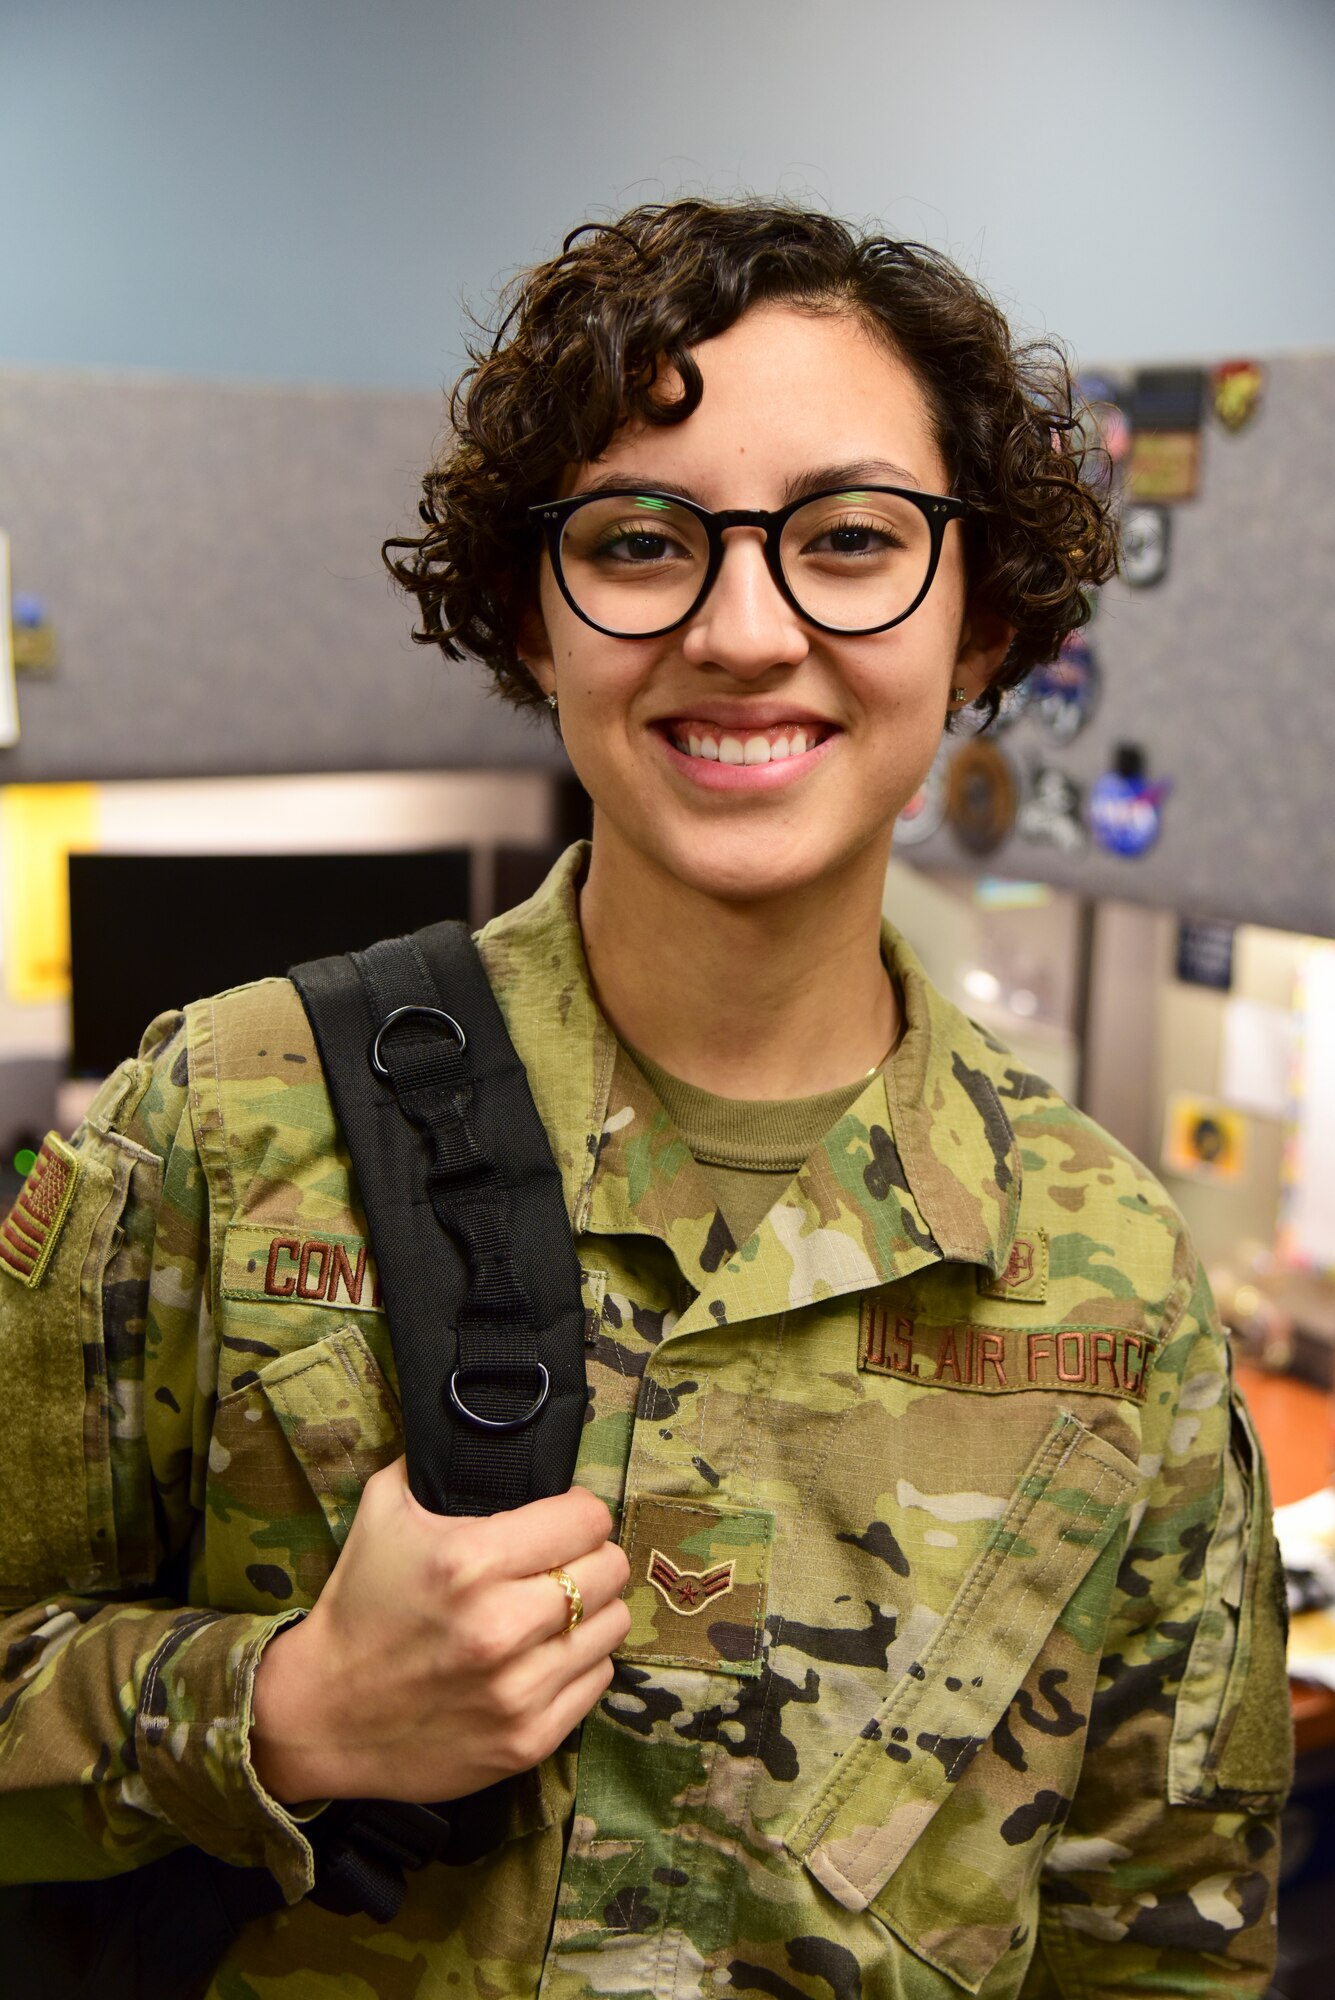 Airman 1st class Sahira Contreras, 47th Healthcare Operations Squadron referral management technician, stands in her office where she helps patients at the Laughlin Air Force Base, Texas, medical center, Jan. 9, 2020. She was awarded Senior Airman Below the Zone on December 2019, giving her privilege of donning her next stripe and the next level of responsibility six months earlier than normal. (U.S. Air Force photo by Senior Airman Anne McCready)